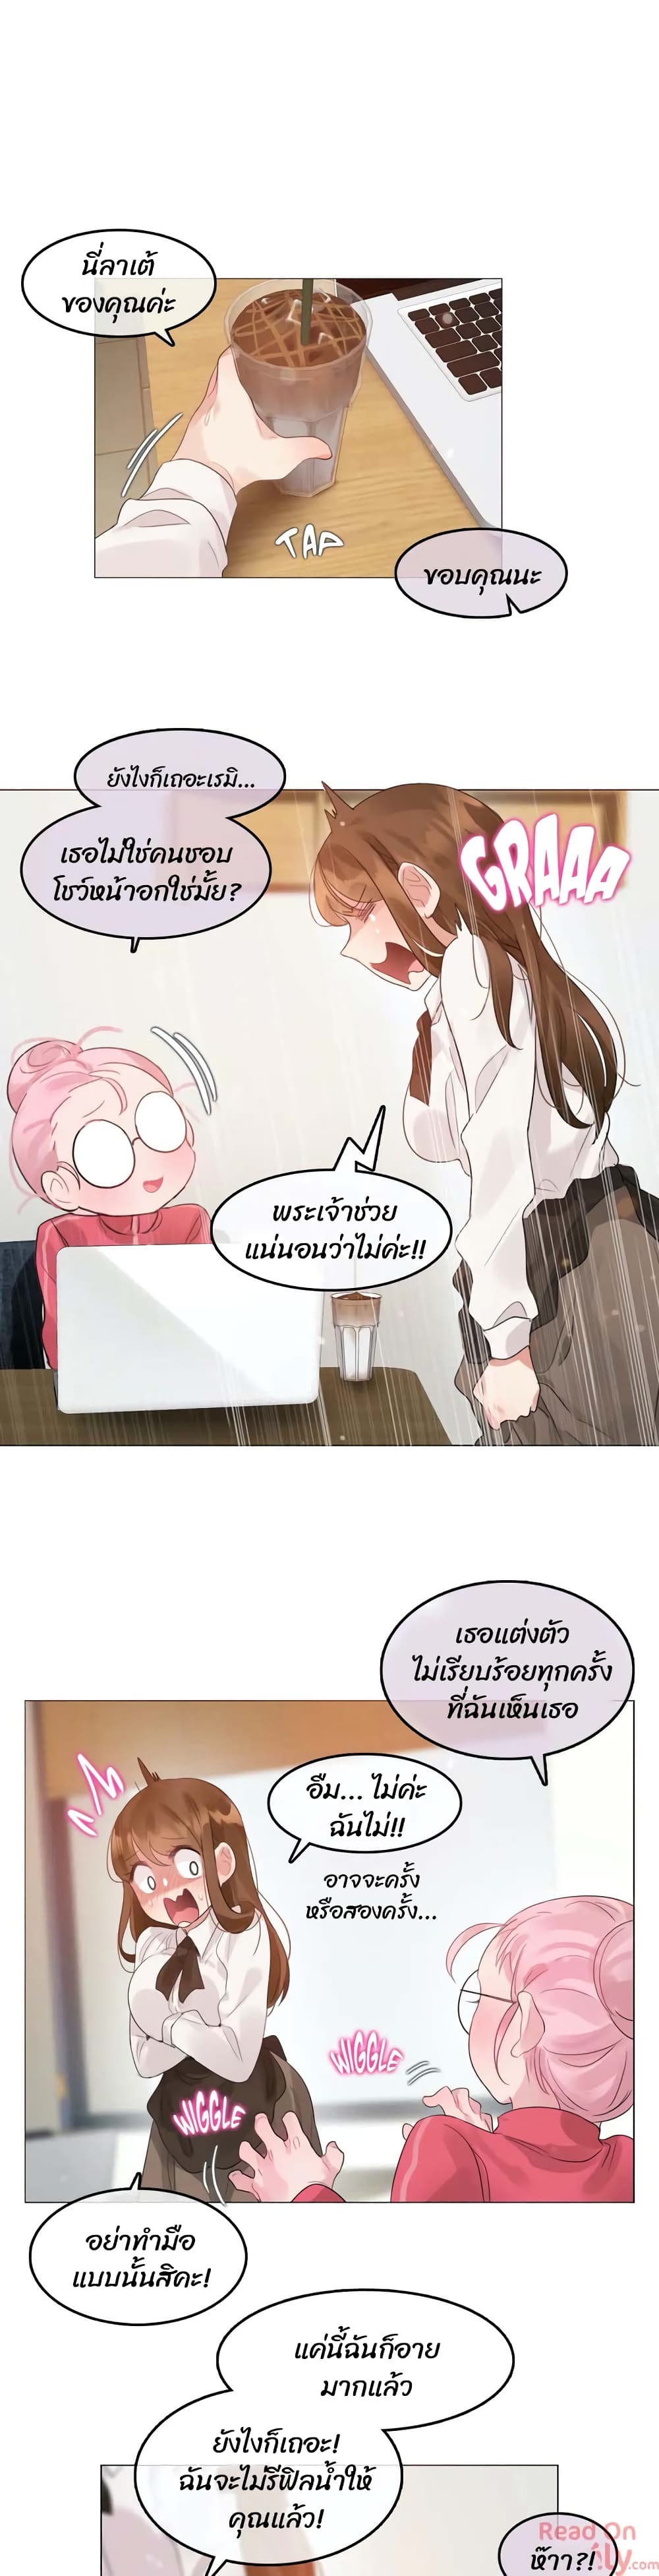 A Pervert’s Daily Life18